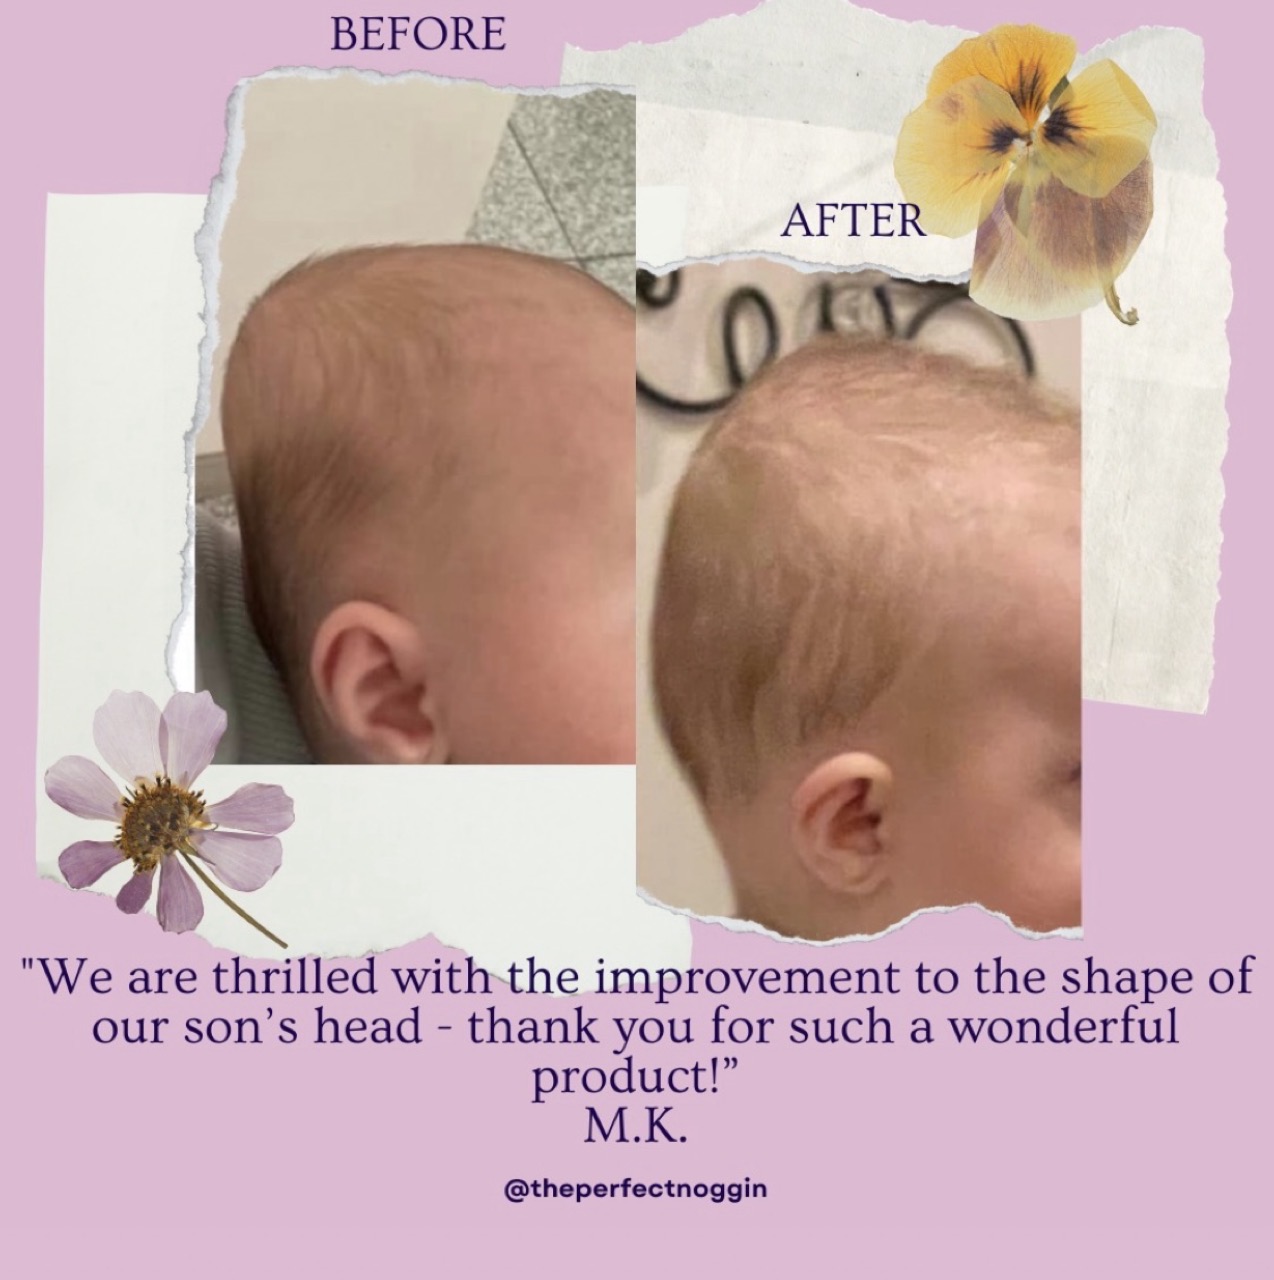 An Instagram ad for a “baby head shaper”